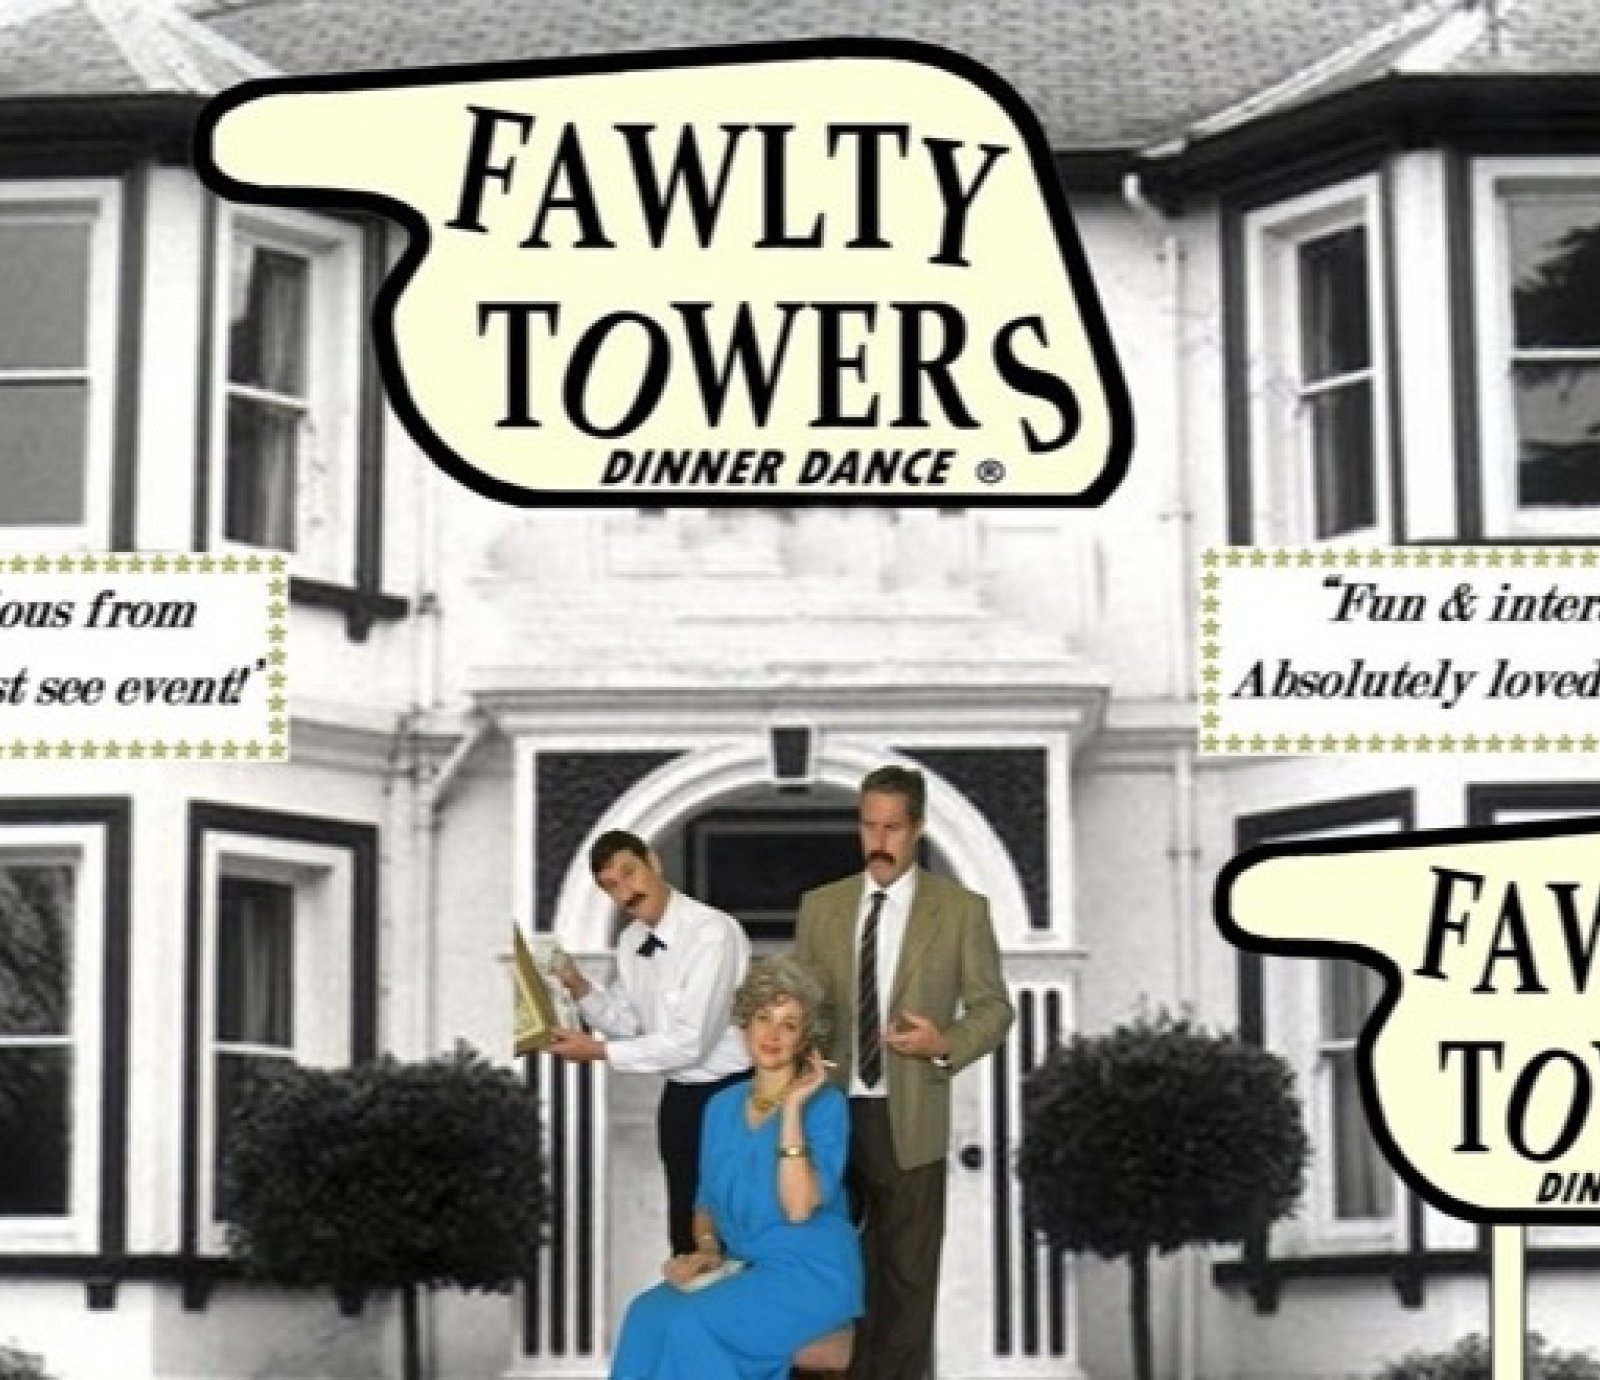 The Fawlty Towers Dinner Dance